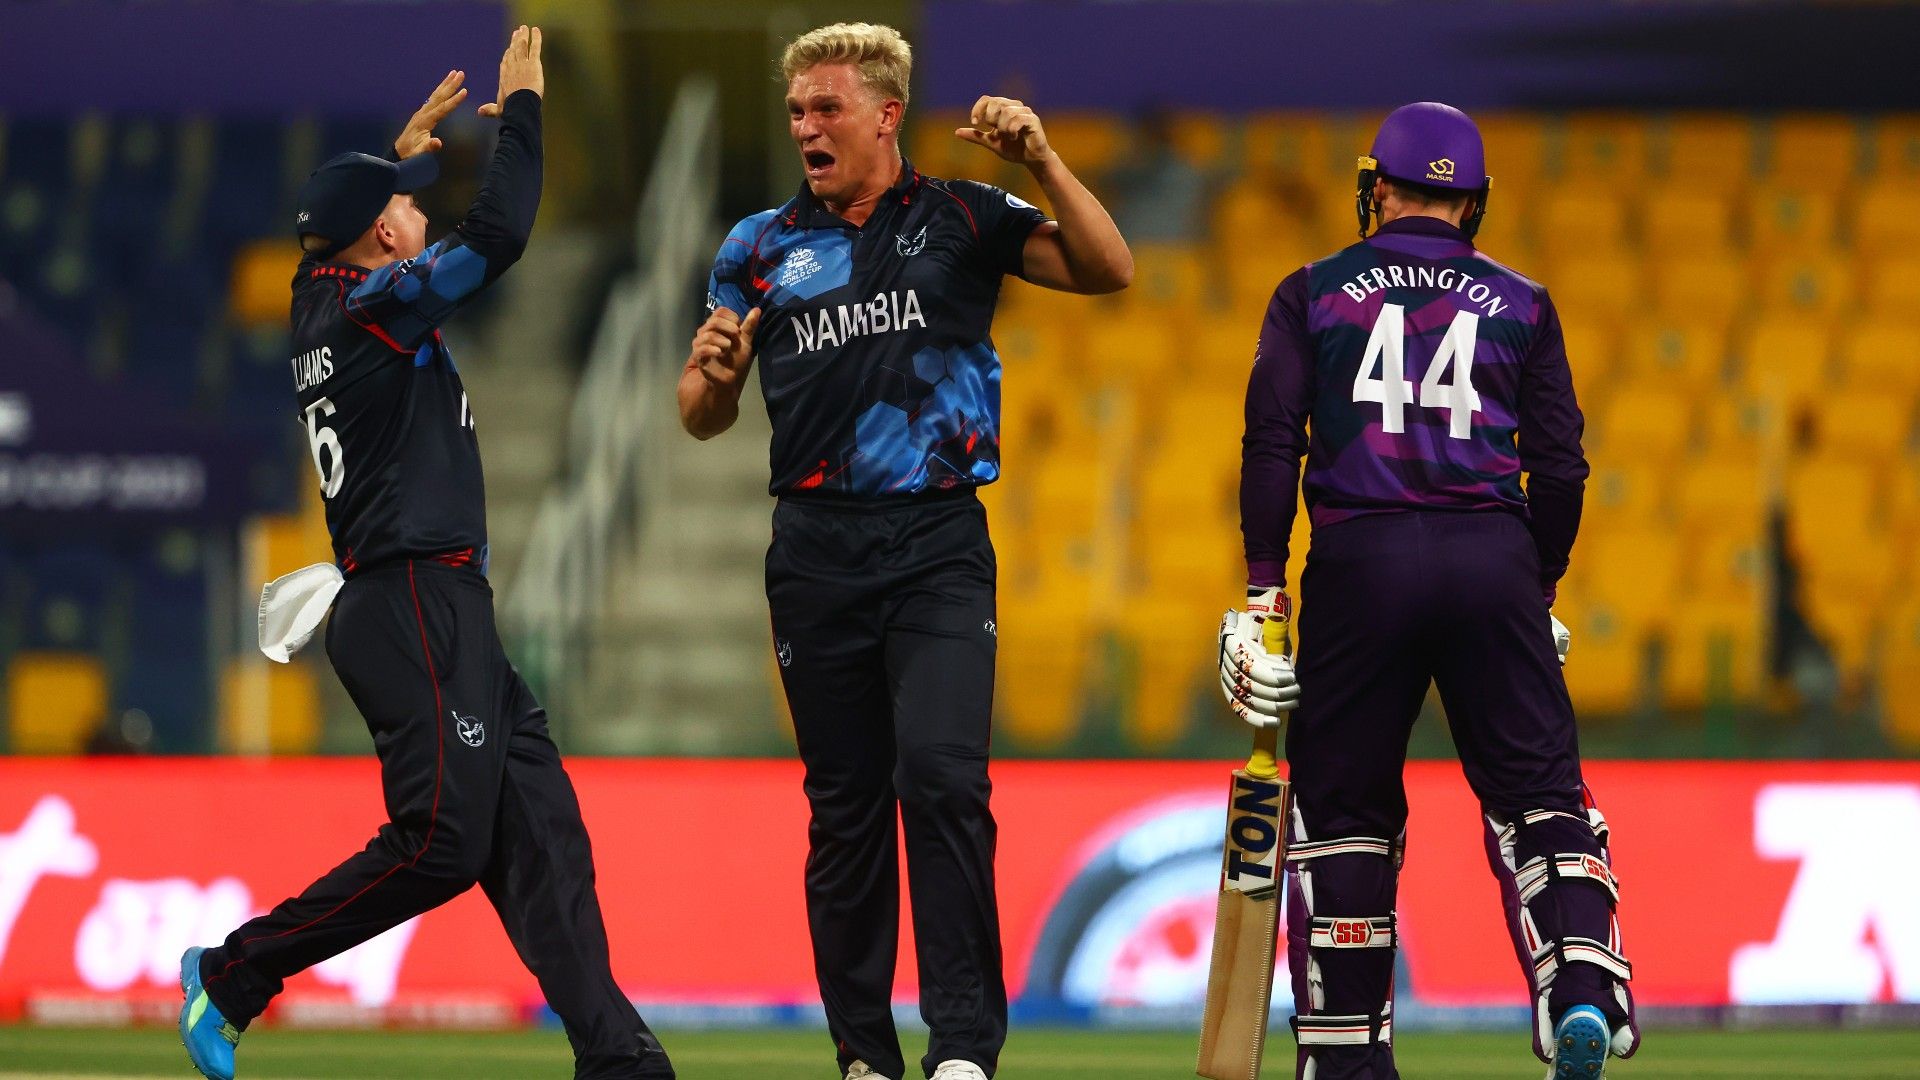 Trumpelmann leads Namibia over Scotland at T20 World Cup